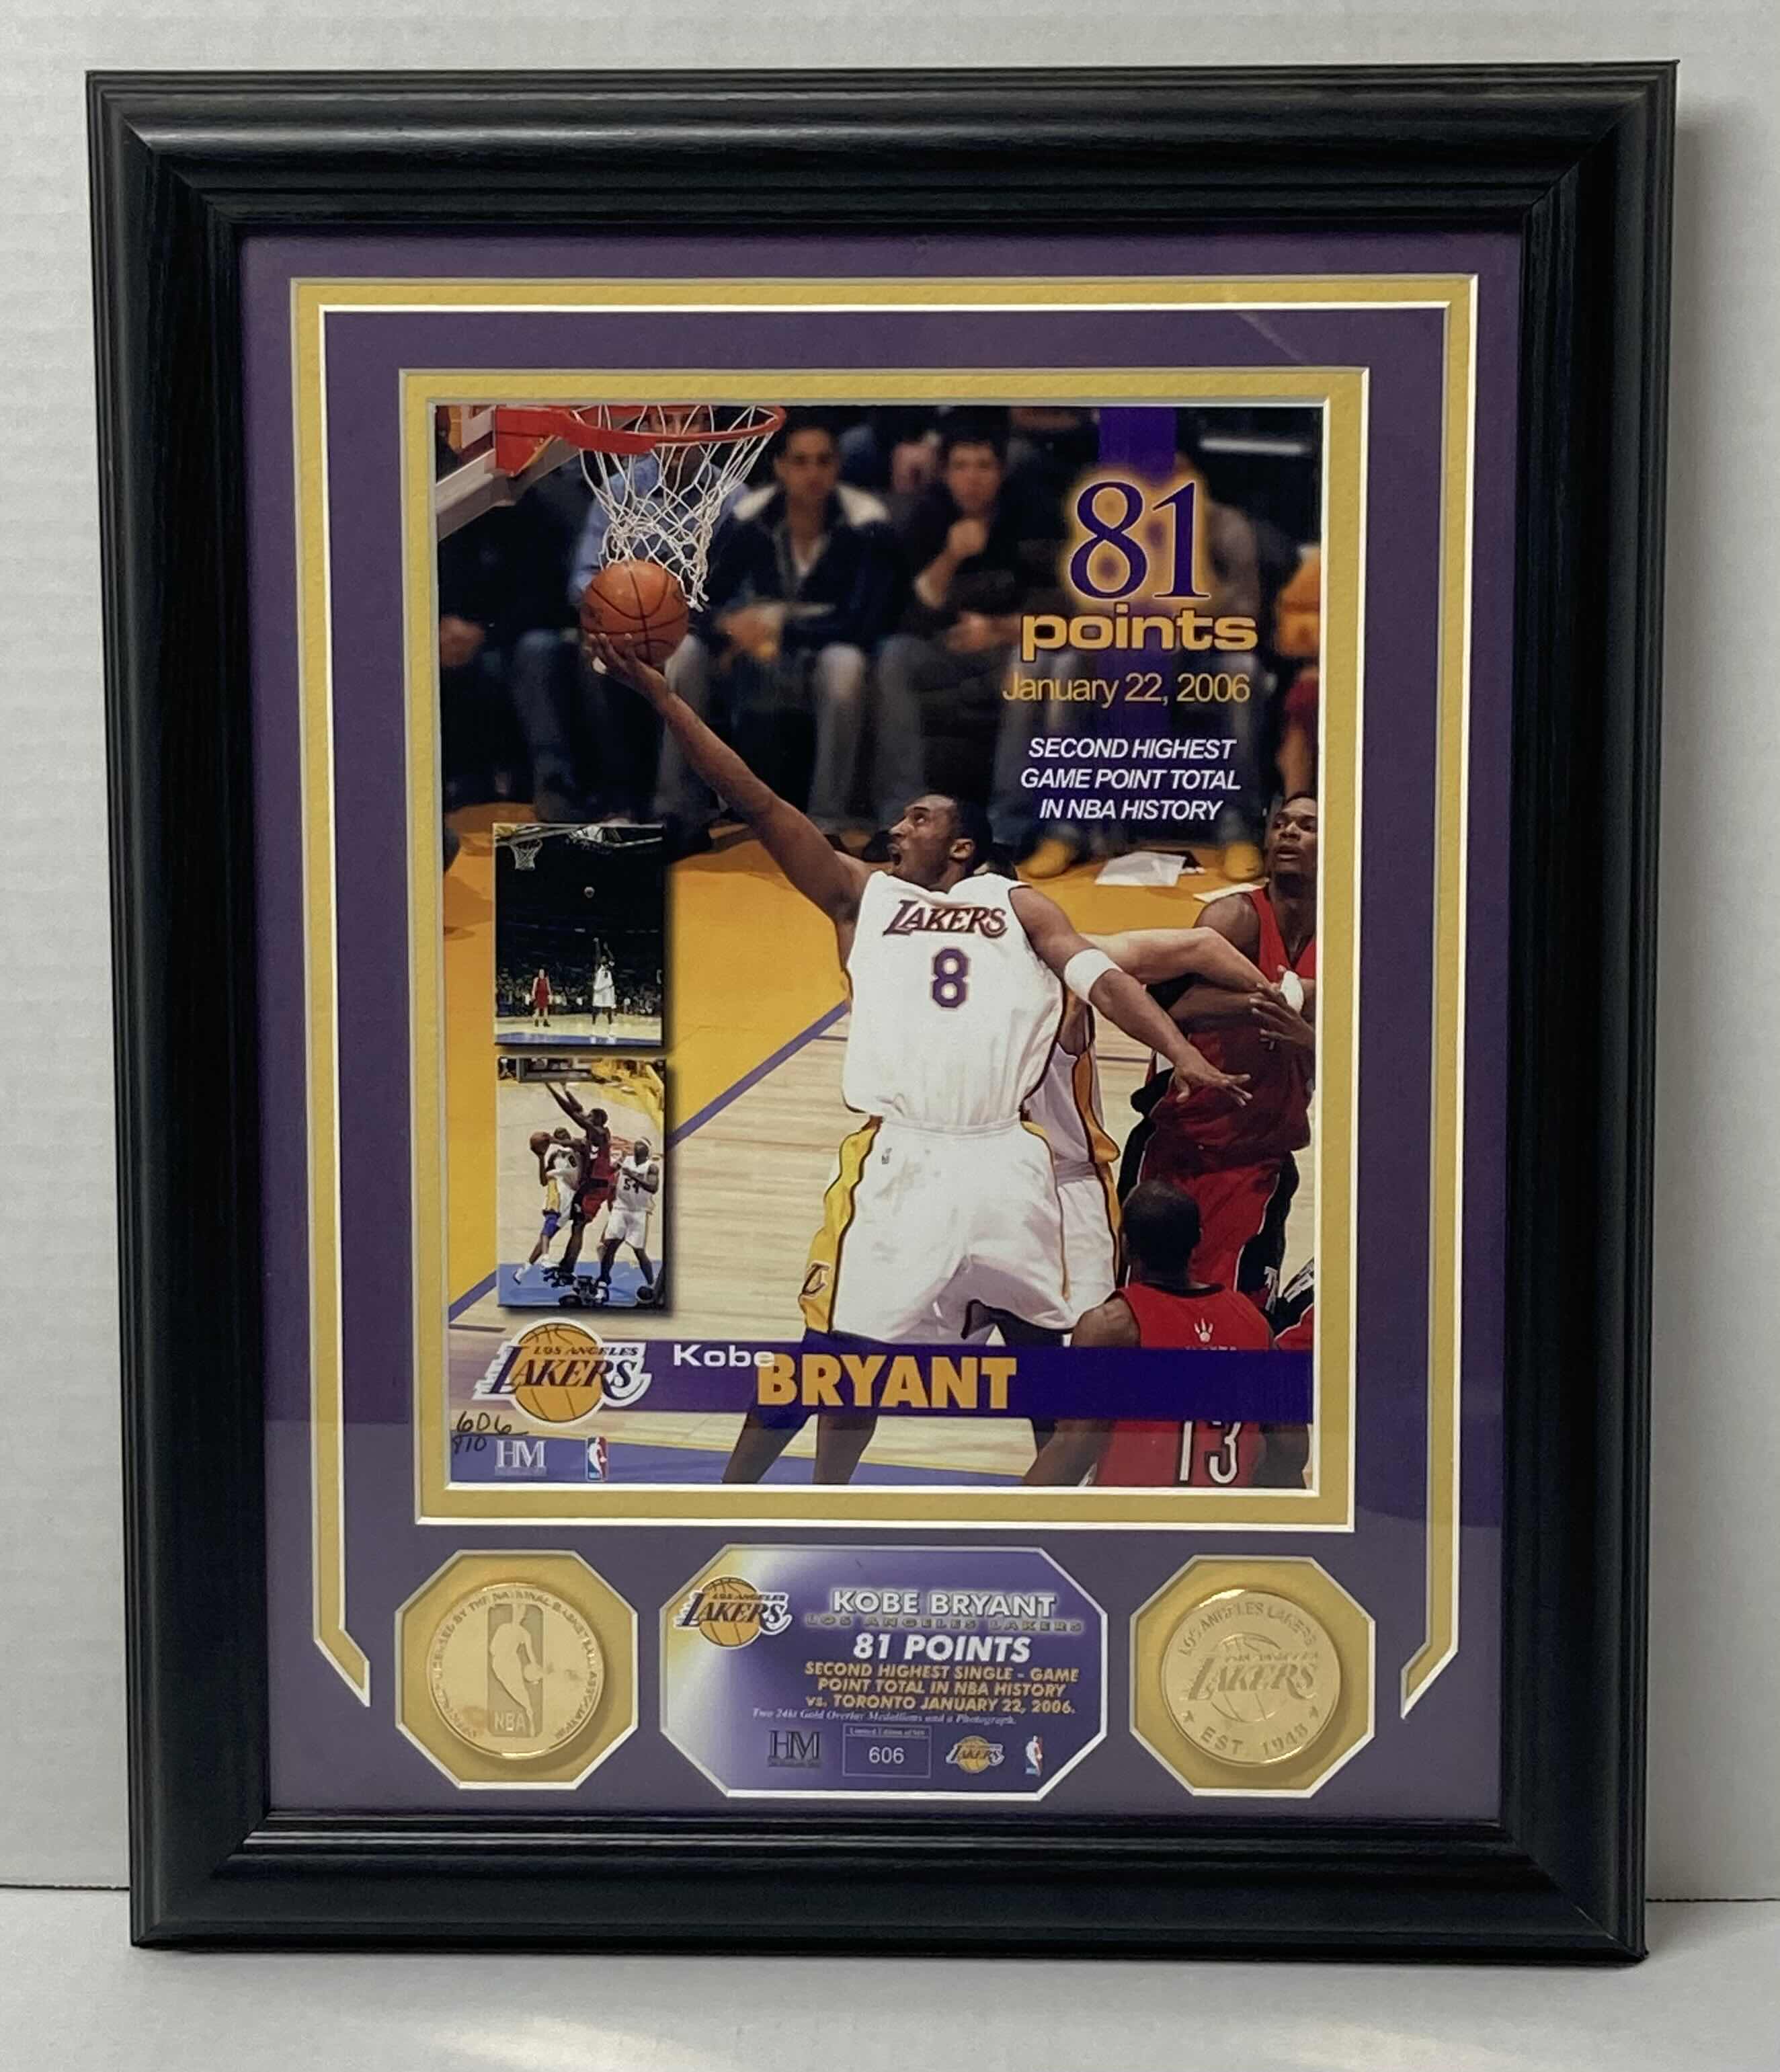 Photo 1 of KOBE BRYANT NO.8 LOS ANGELES LAKERS 81 POINTS FRAMED PHOTOMINT 1-22-2006 W NBA & LAKERS GOLD MEDALLIONS